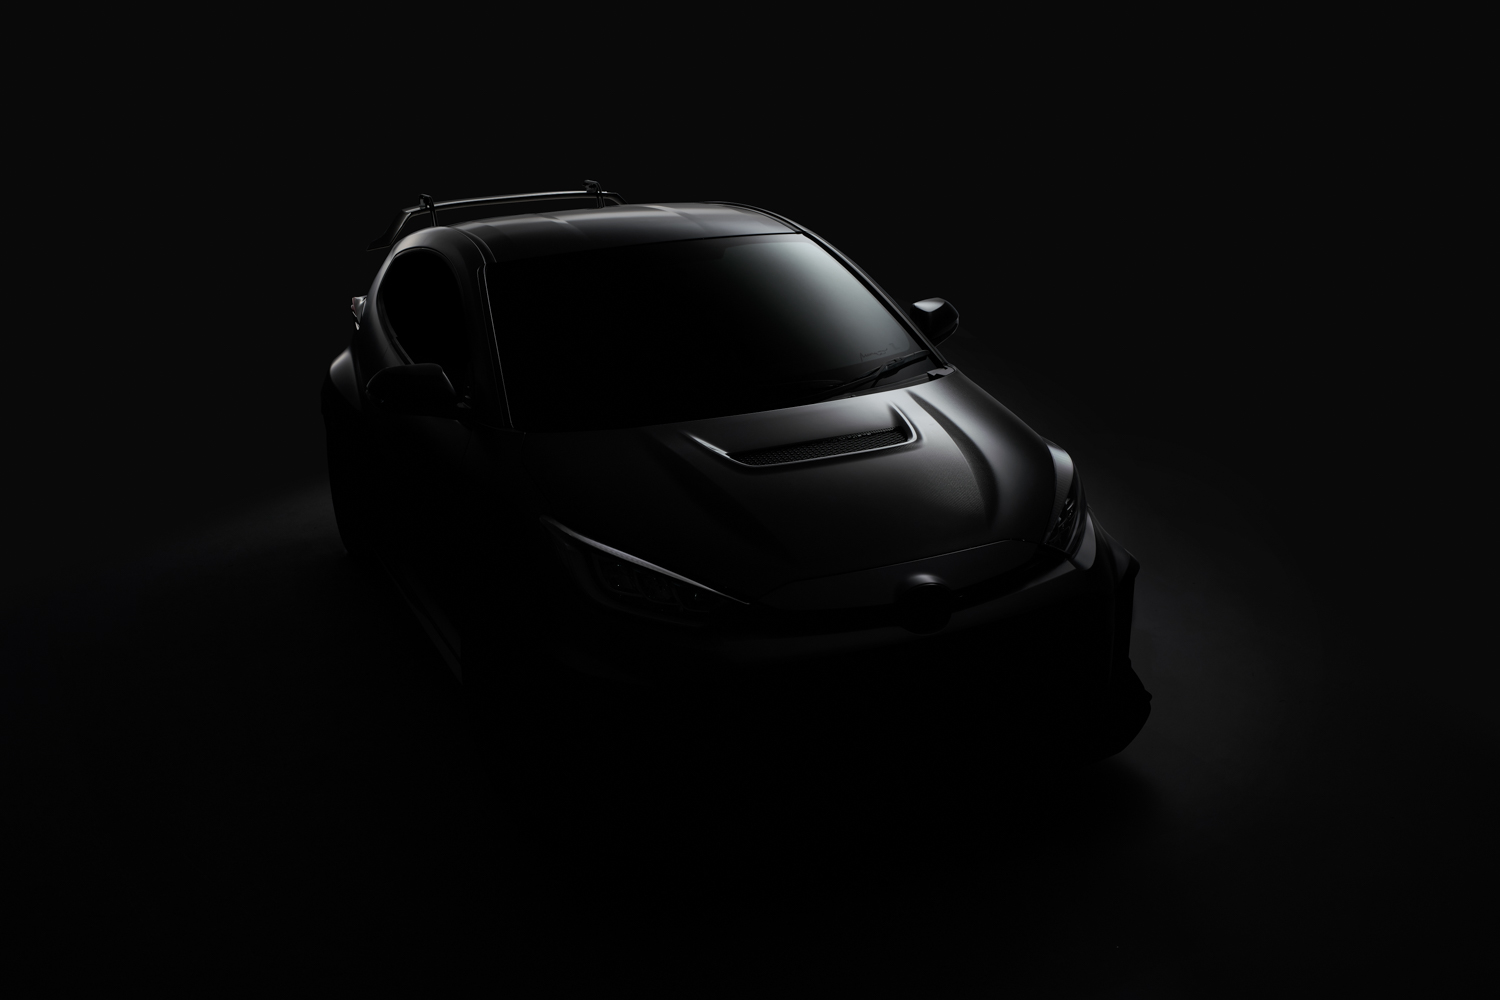 Car News | Toyota to show race-bred models in Tokyo | CompleteCar.ie